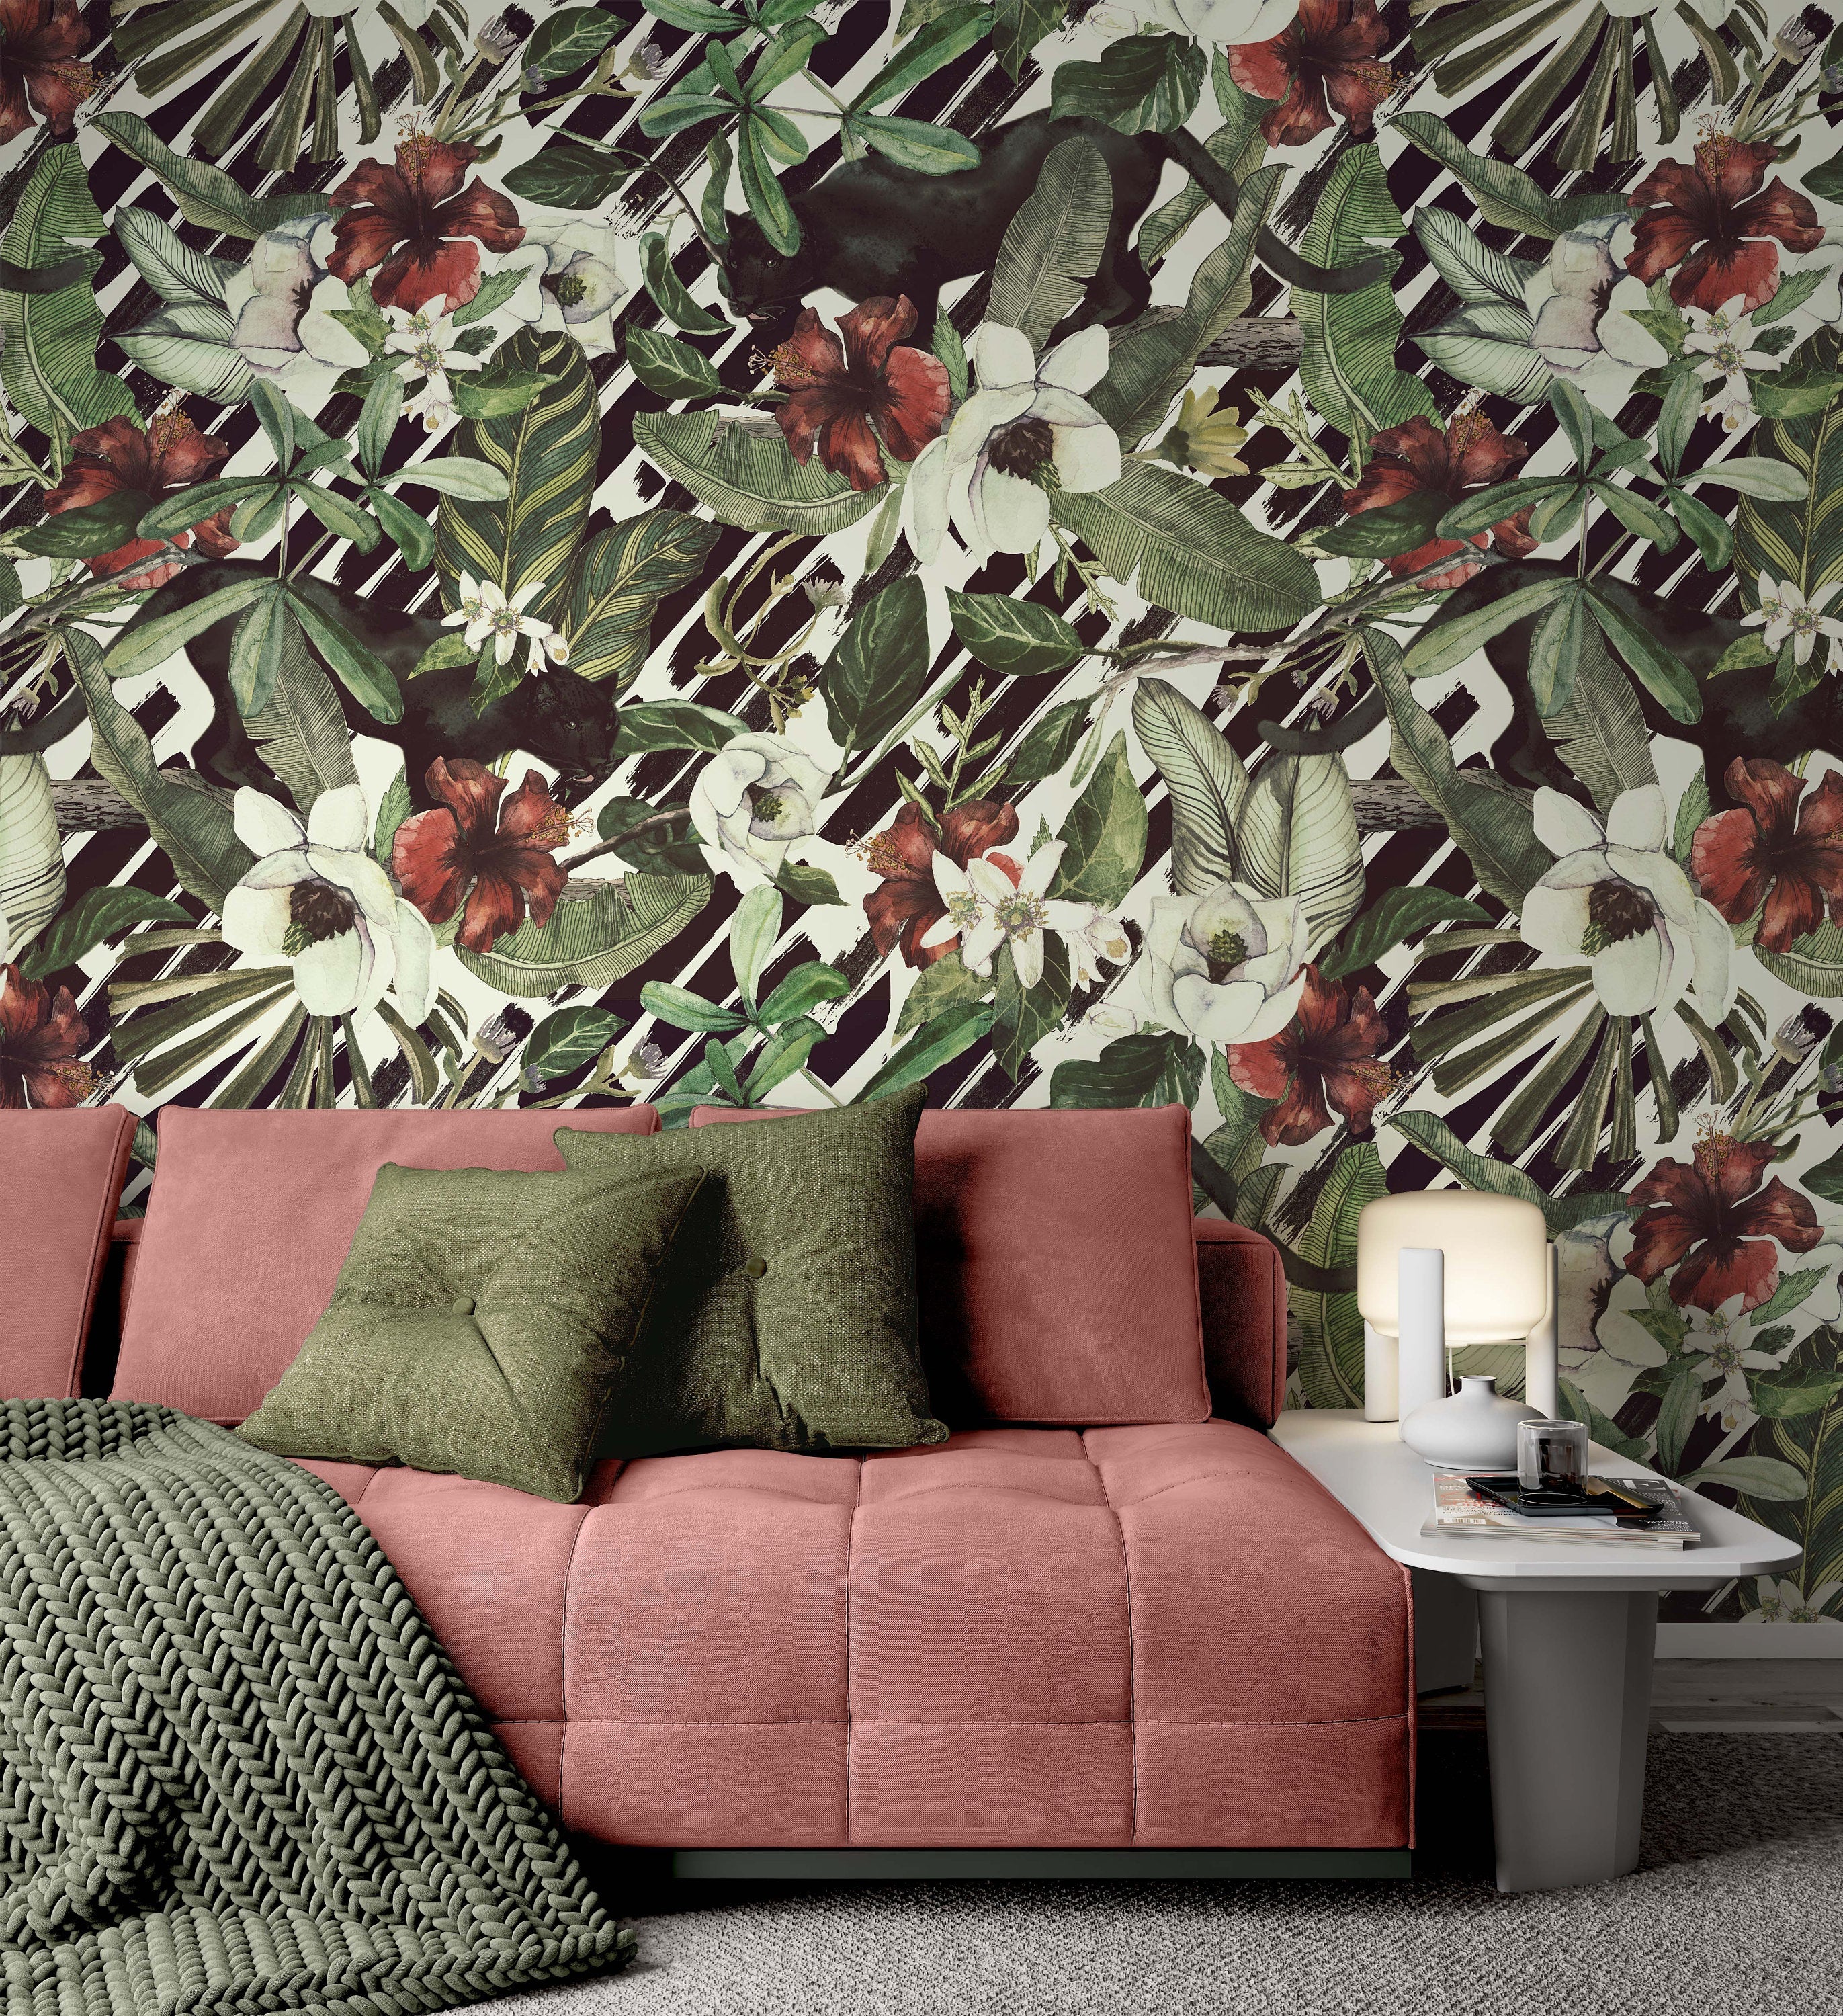 Tropical Flowers Banana Leaves Panther Wildcat Animal Floral Wallpaper Restaurant Living Room Cafe Office Bedroom Mural Home Wall Art